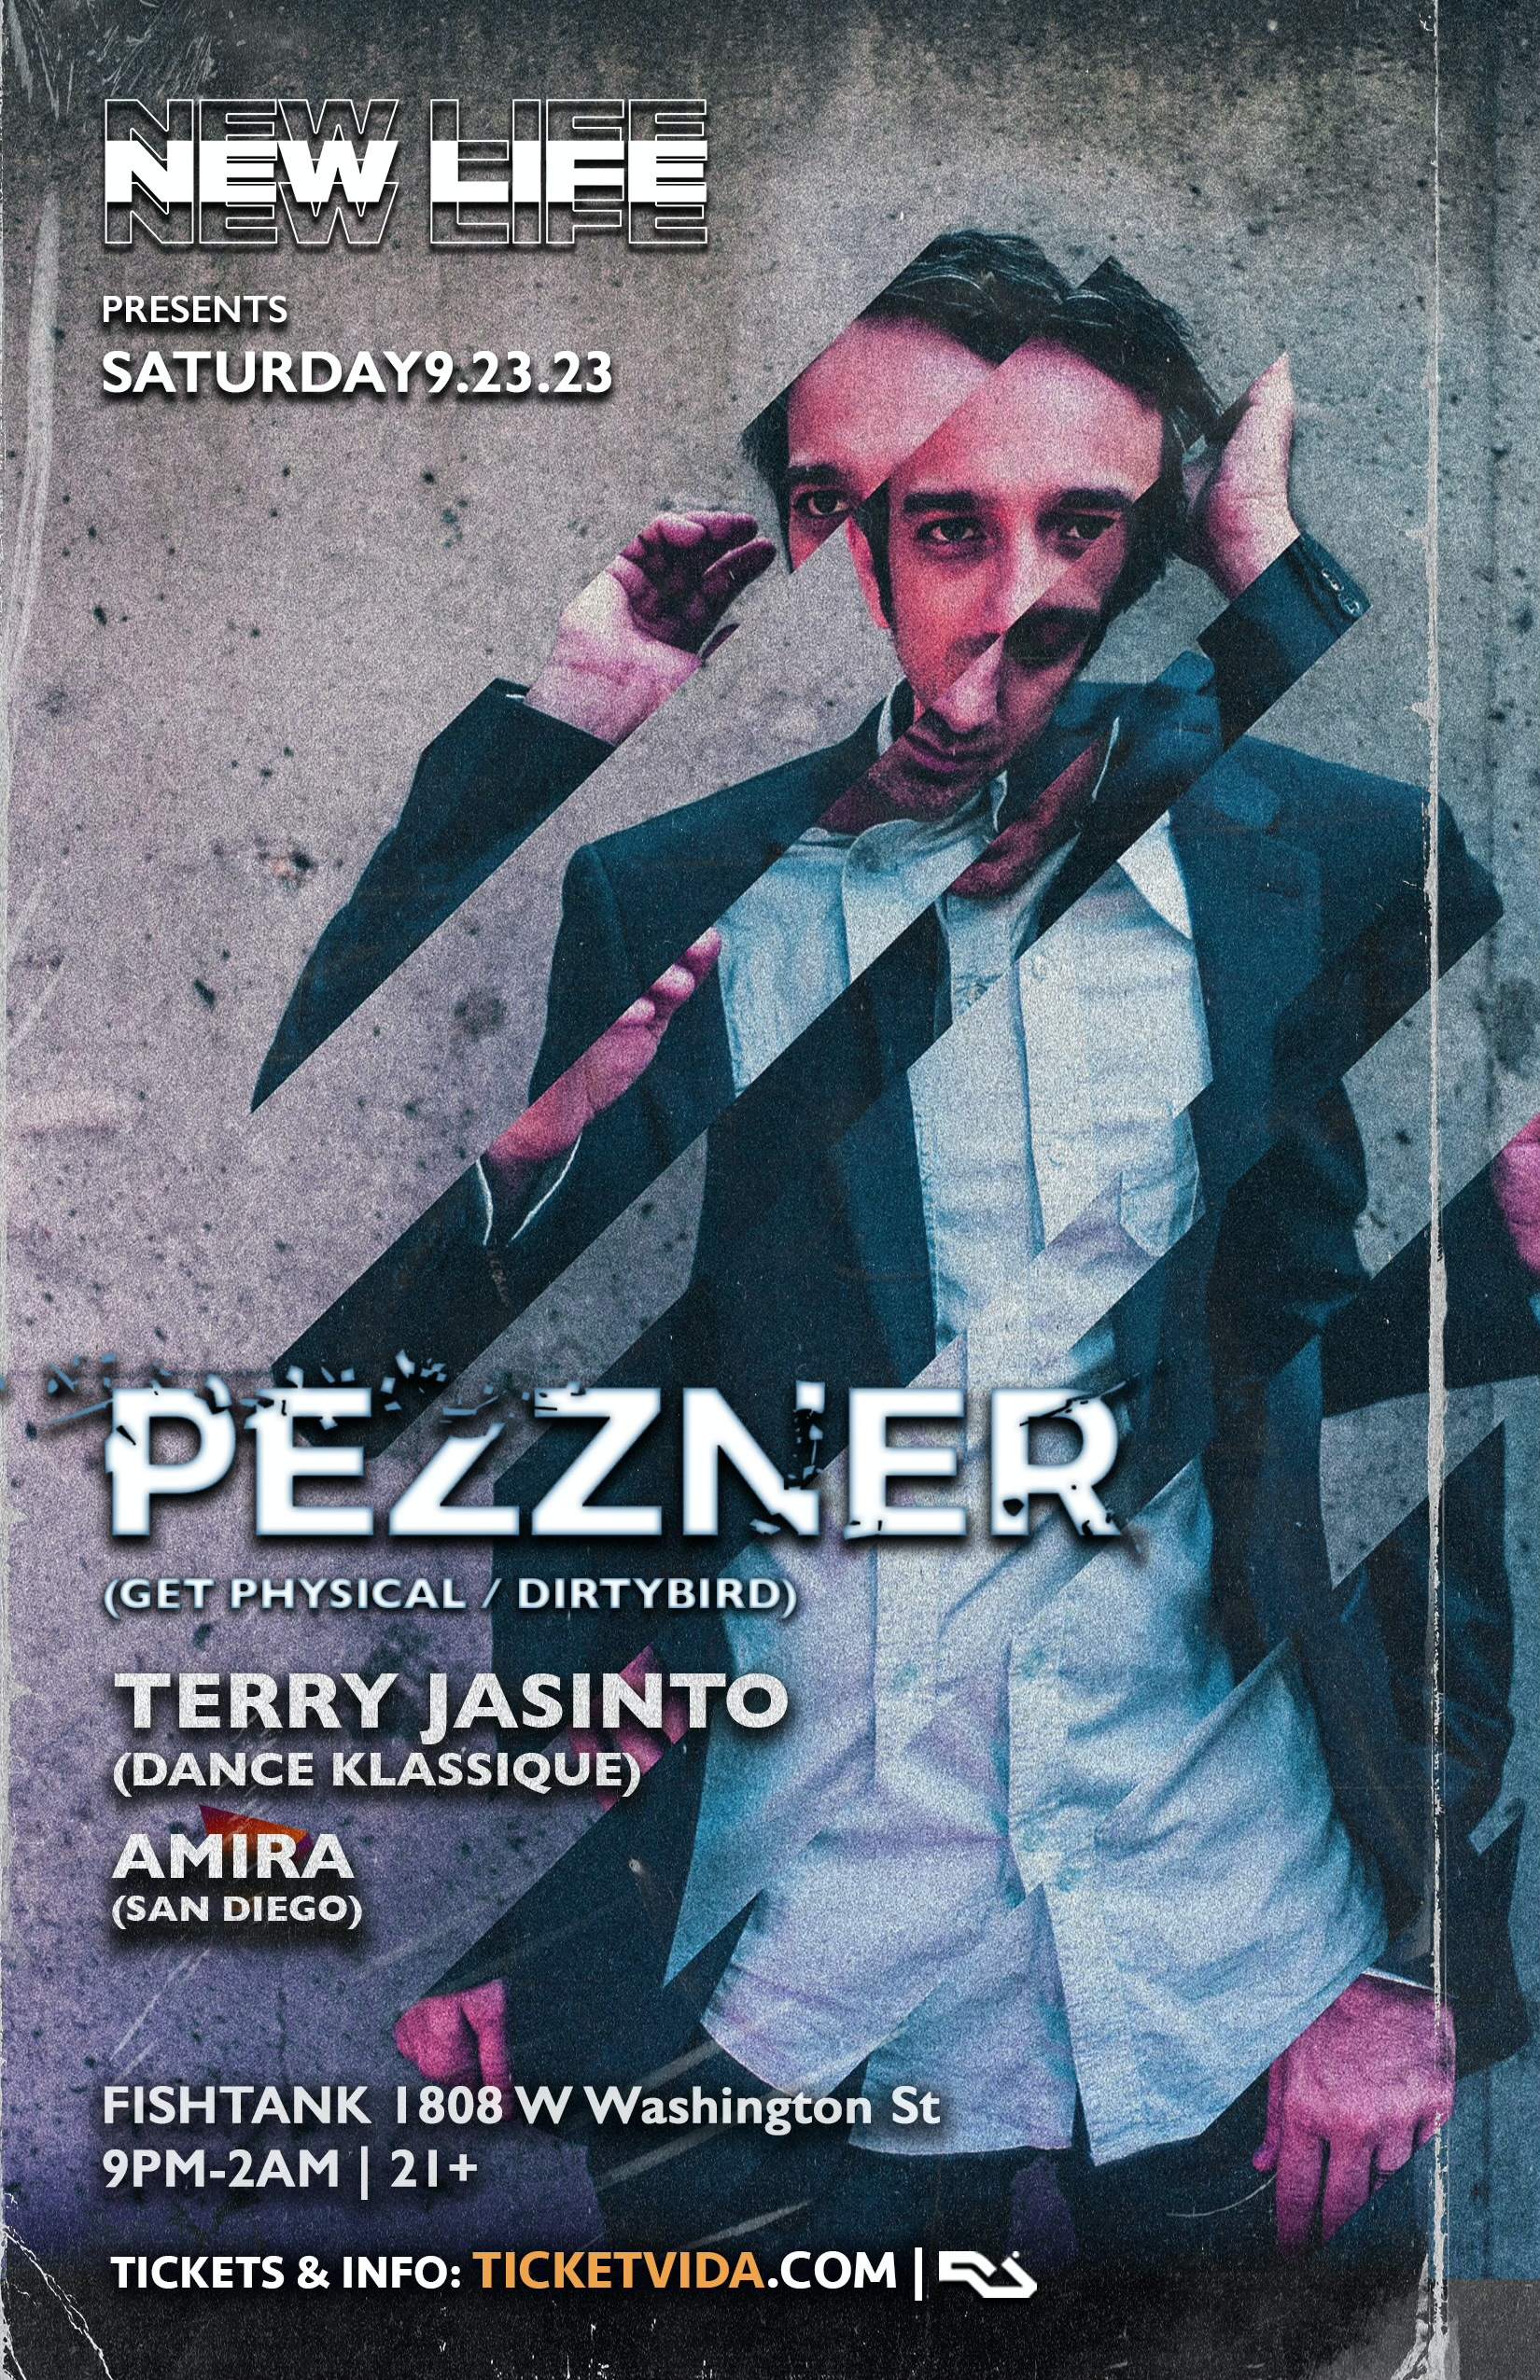 New Life presents Pezzner (Dirtybird/ Get Physical), Terry Jasinto and AMIRA - フライヤー表